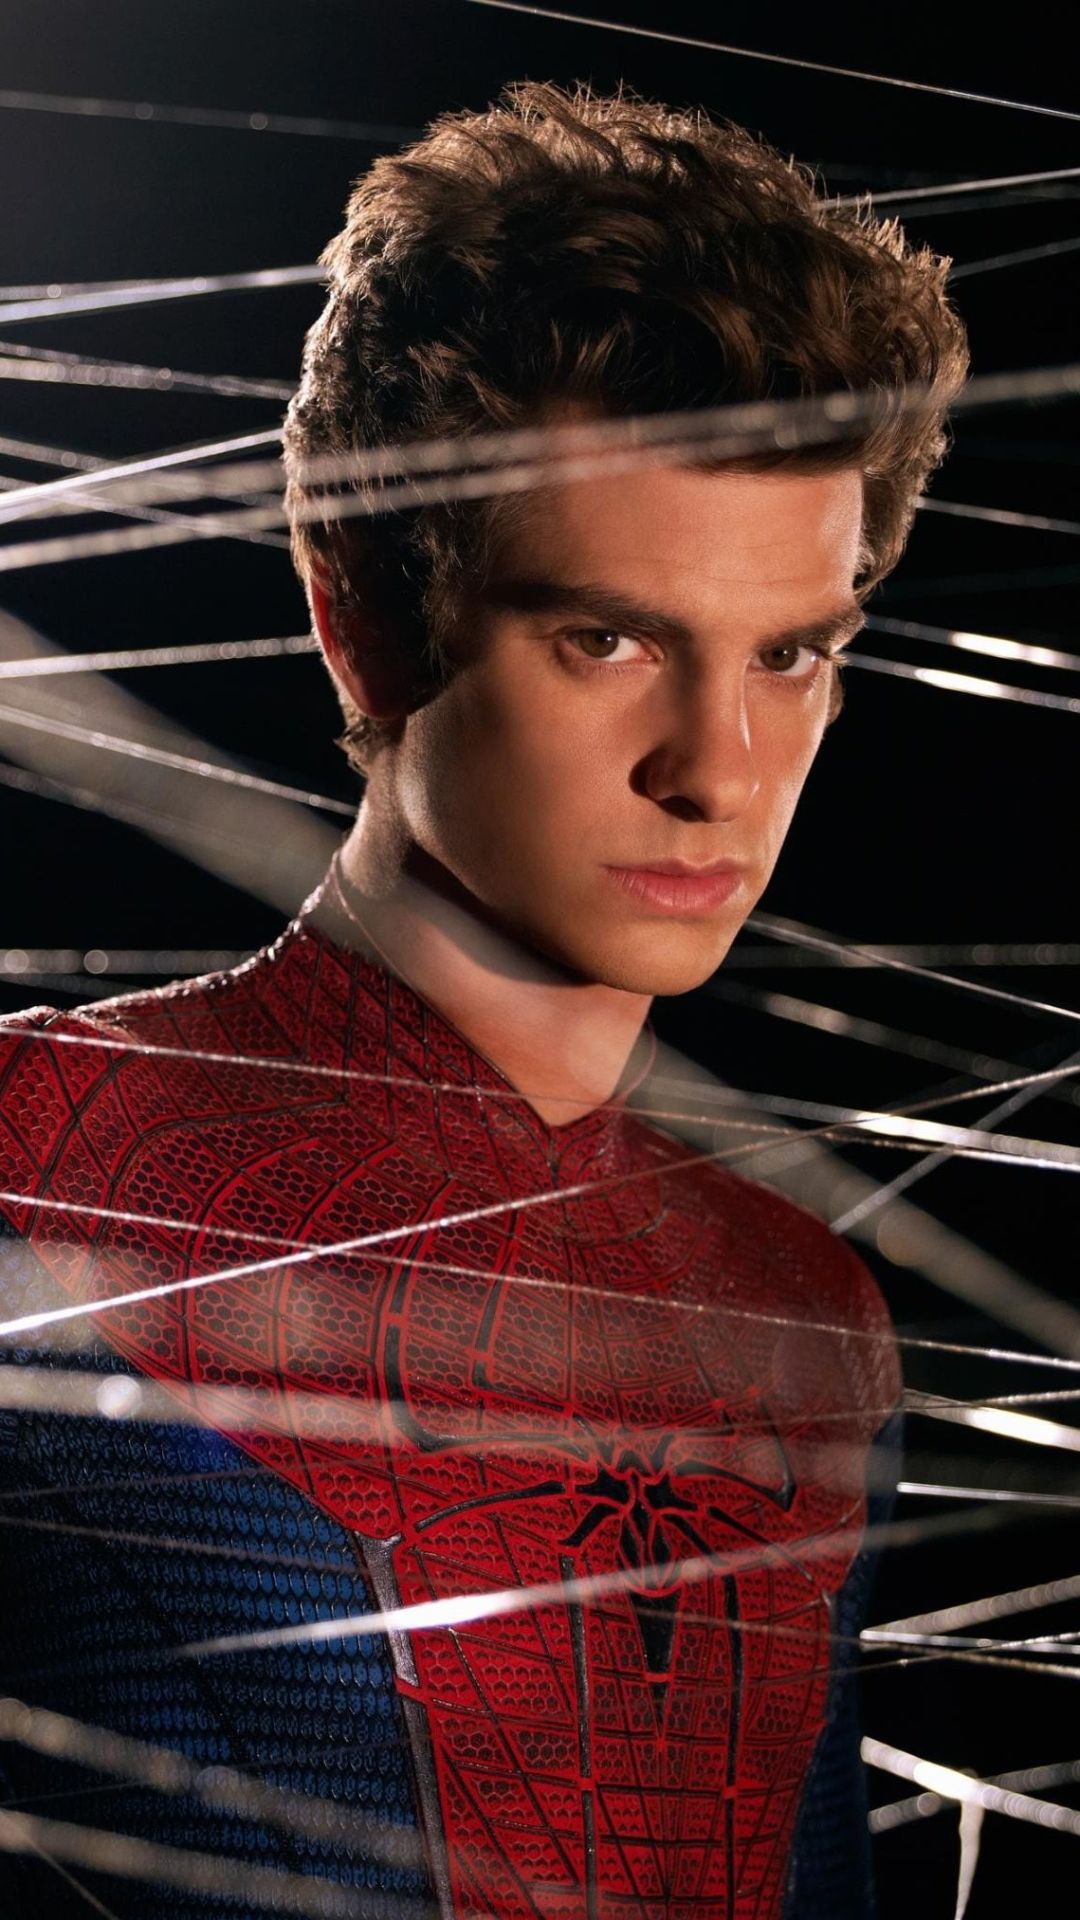 Mobile wallpaper: Spider Man, Movie, The Amazing Spider Man, Andrew Garfield, 1183830 download the picture for free